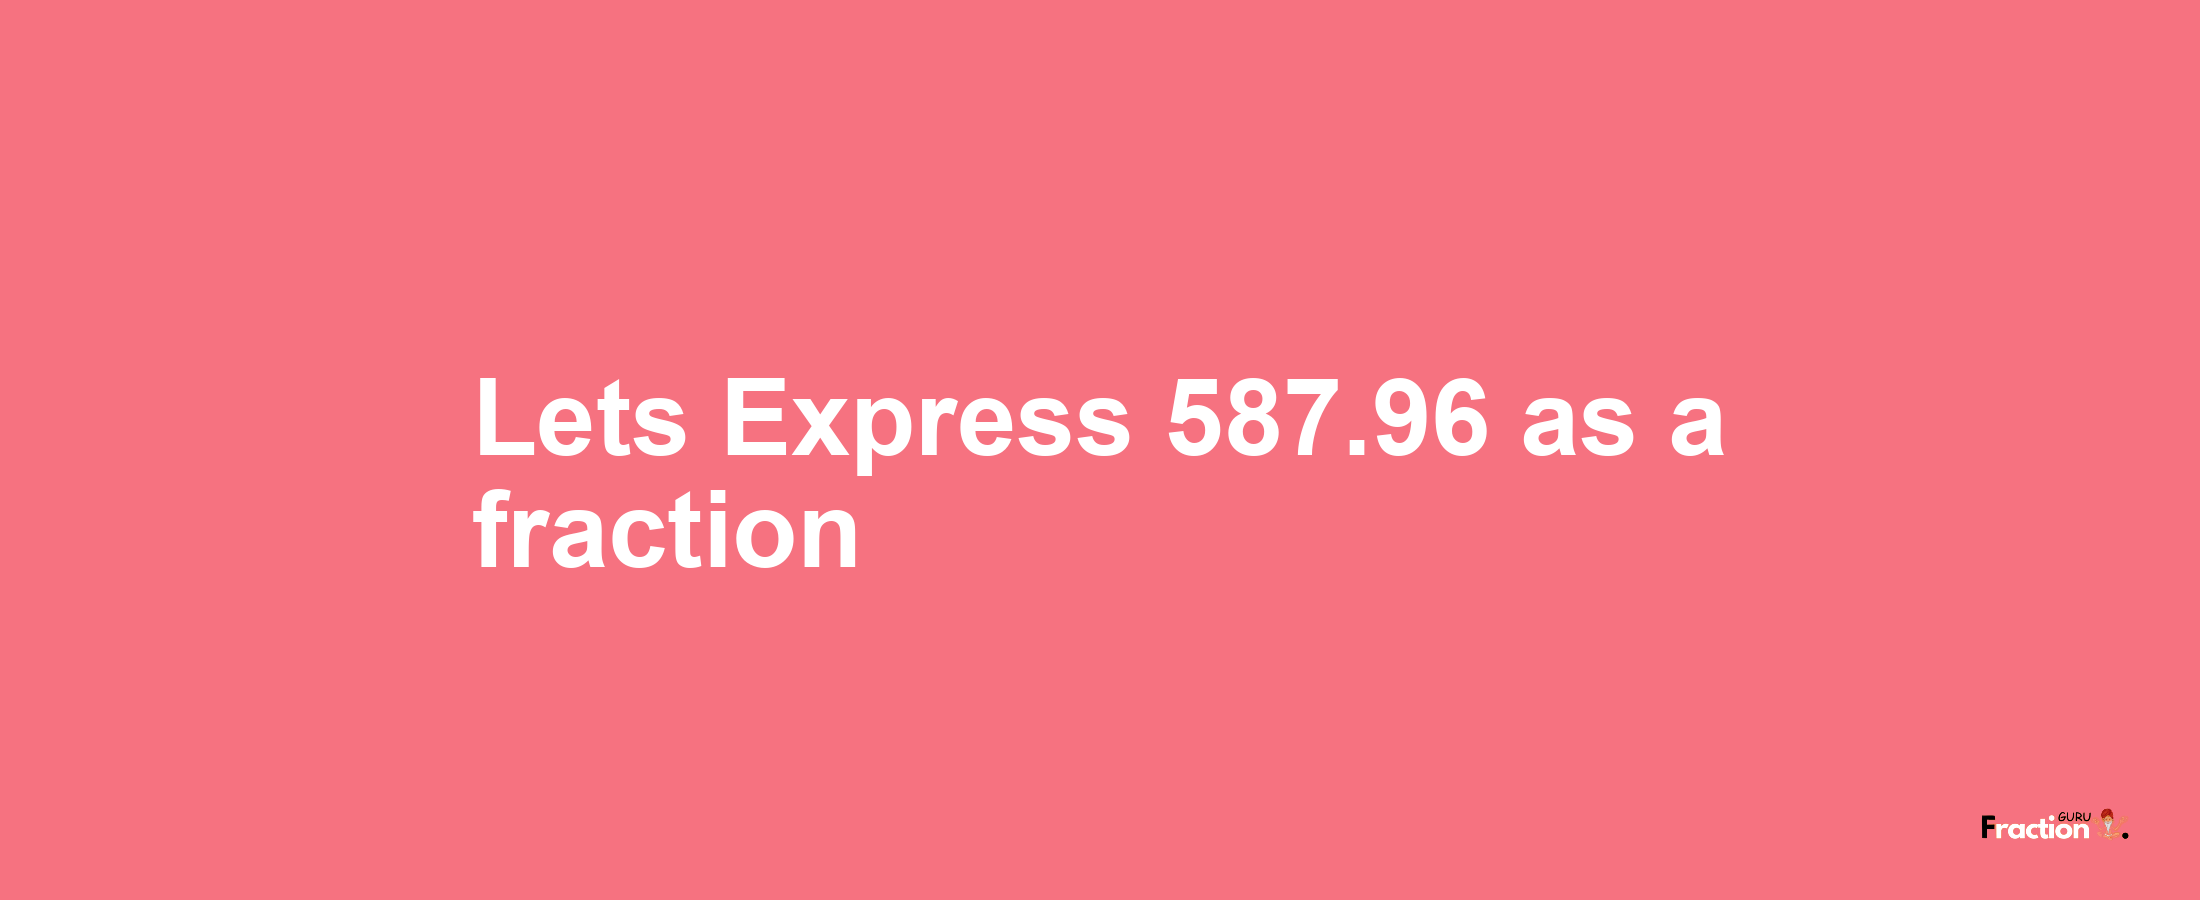 Lets Express 587.96 as afraction